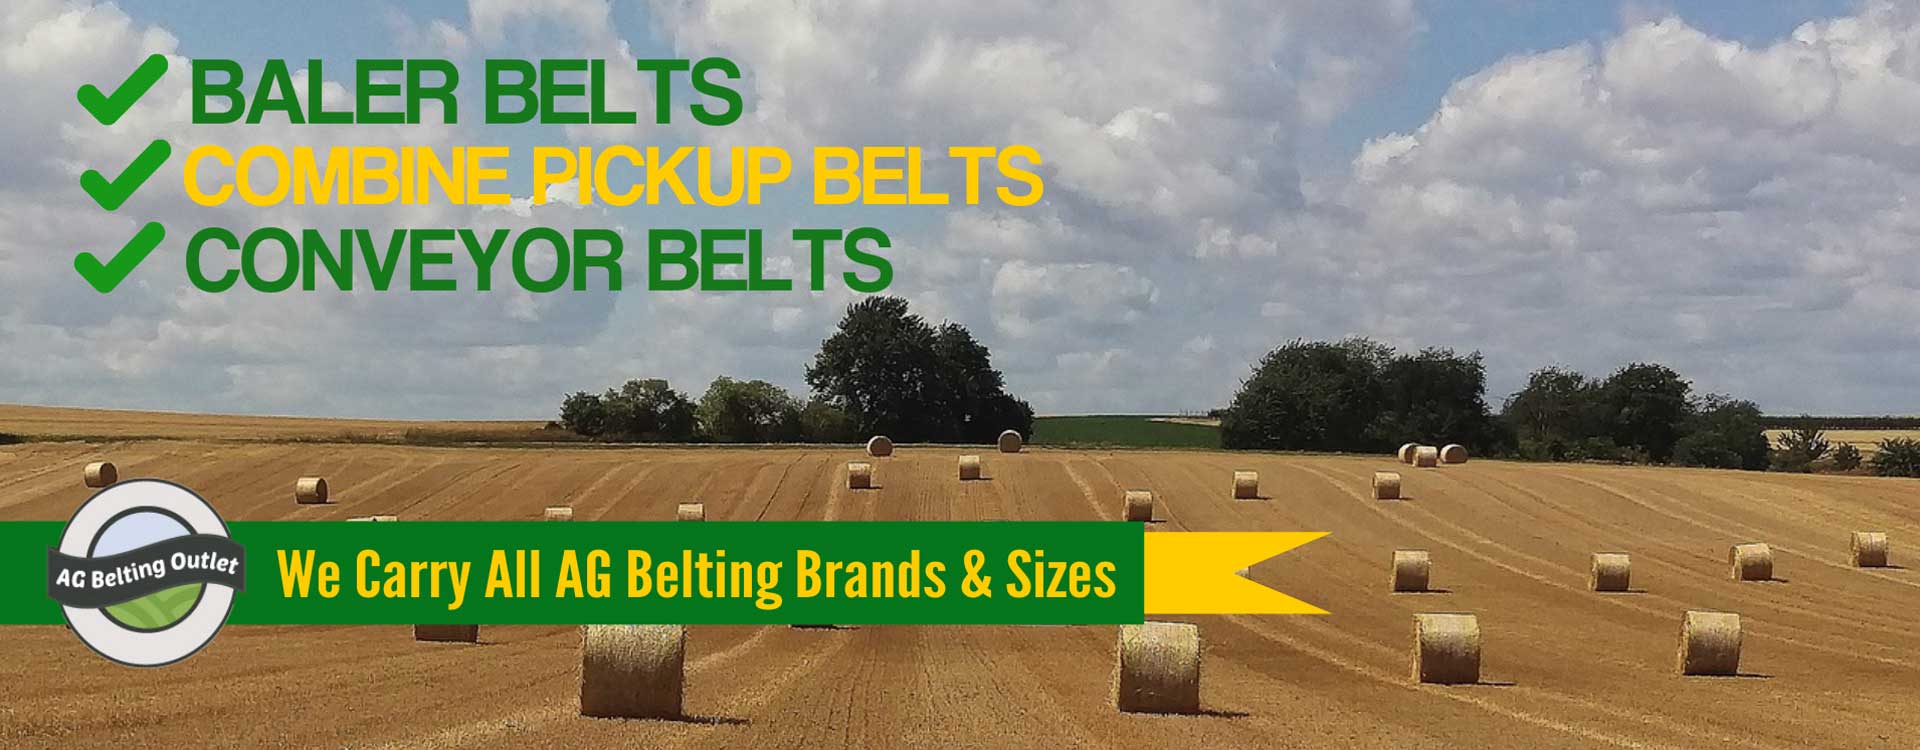 baler belts and accessories